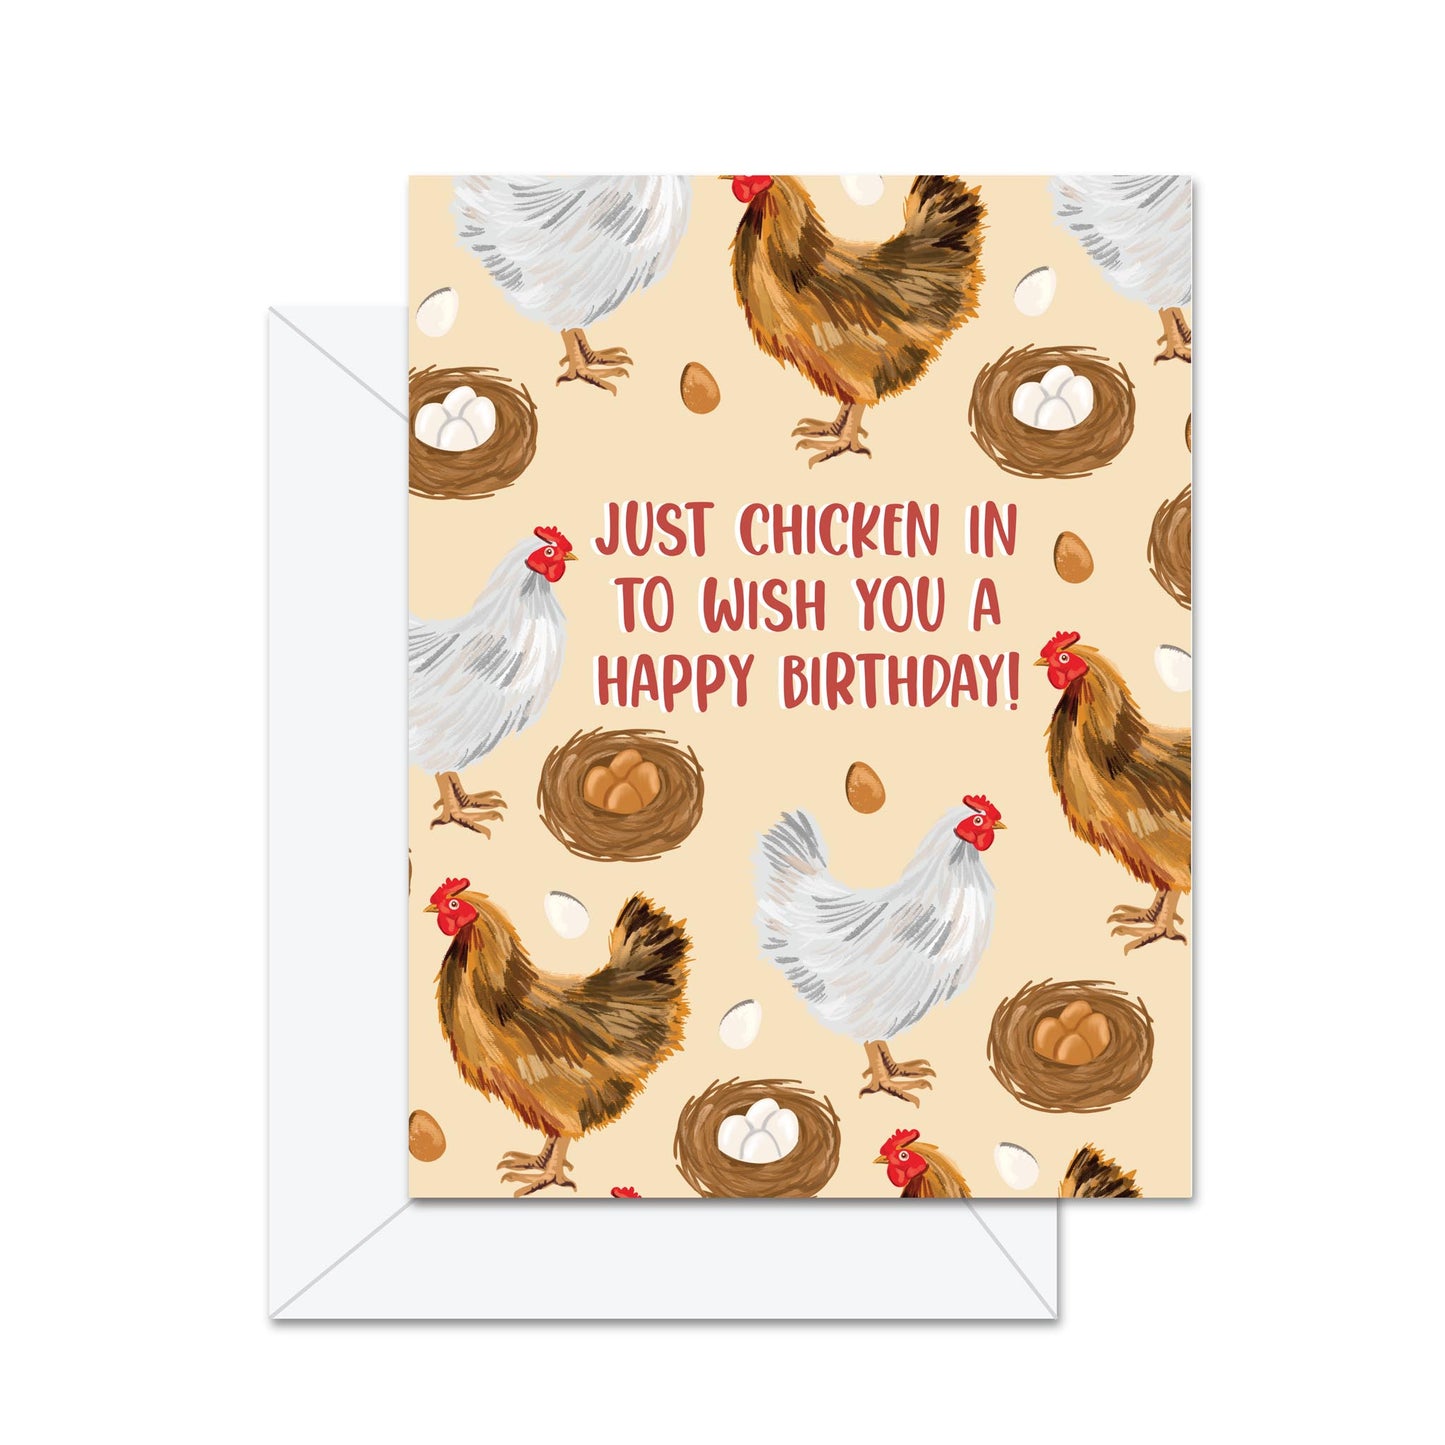 Just Chicken In To Wish You A Happy Birthday! - Greeting Card